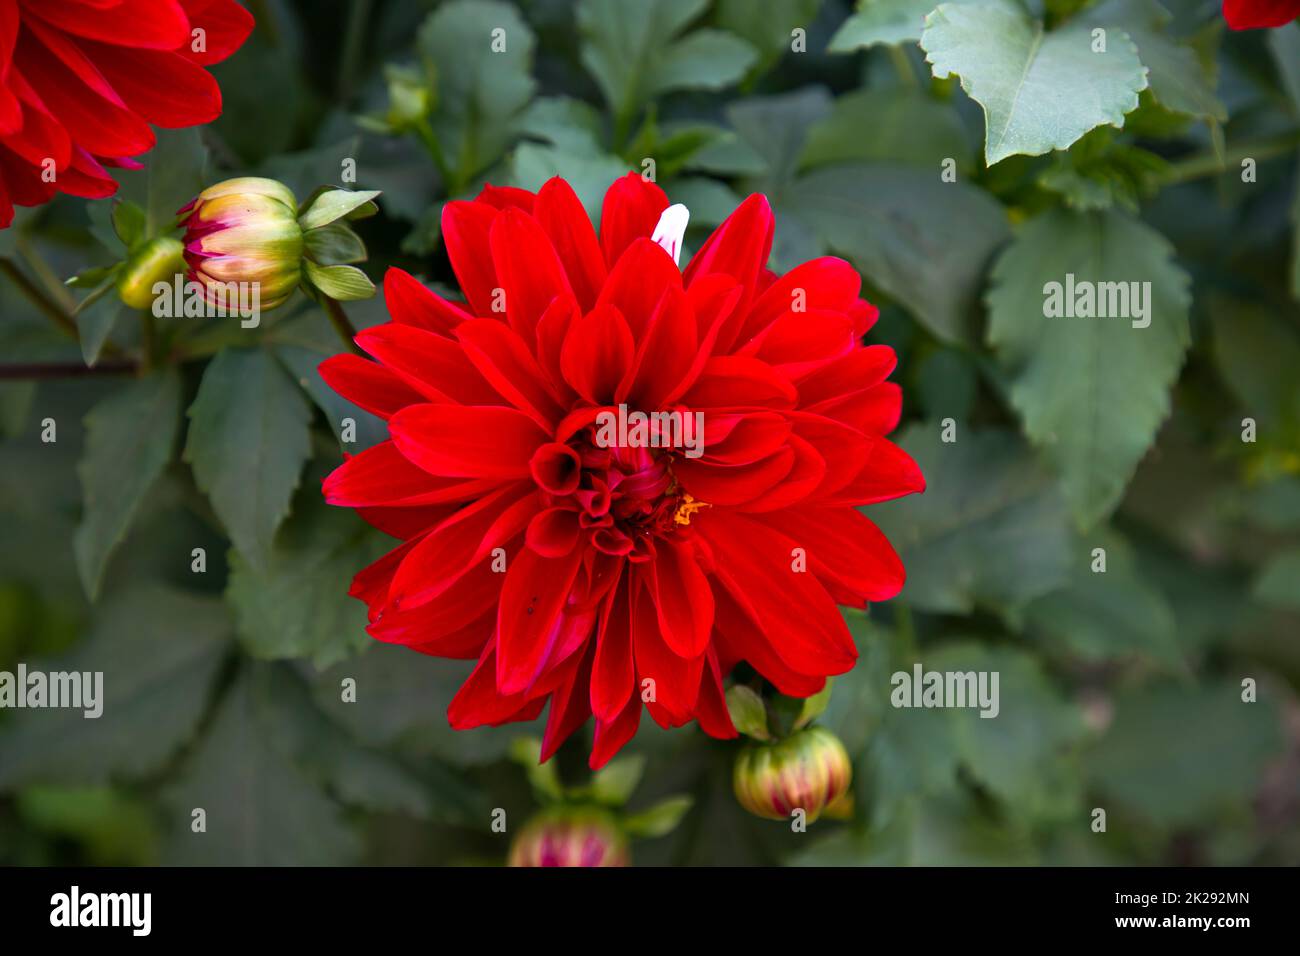 Red Blooming Dahlia Flower in the Garden Tree. Stock Photo